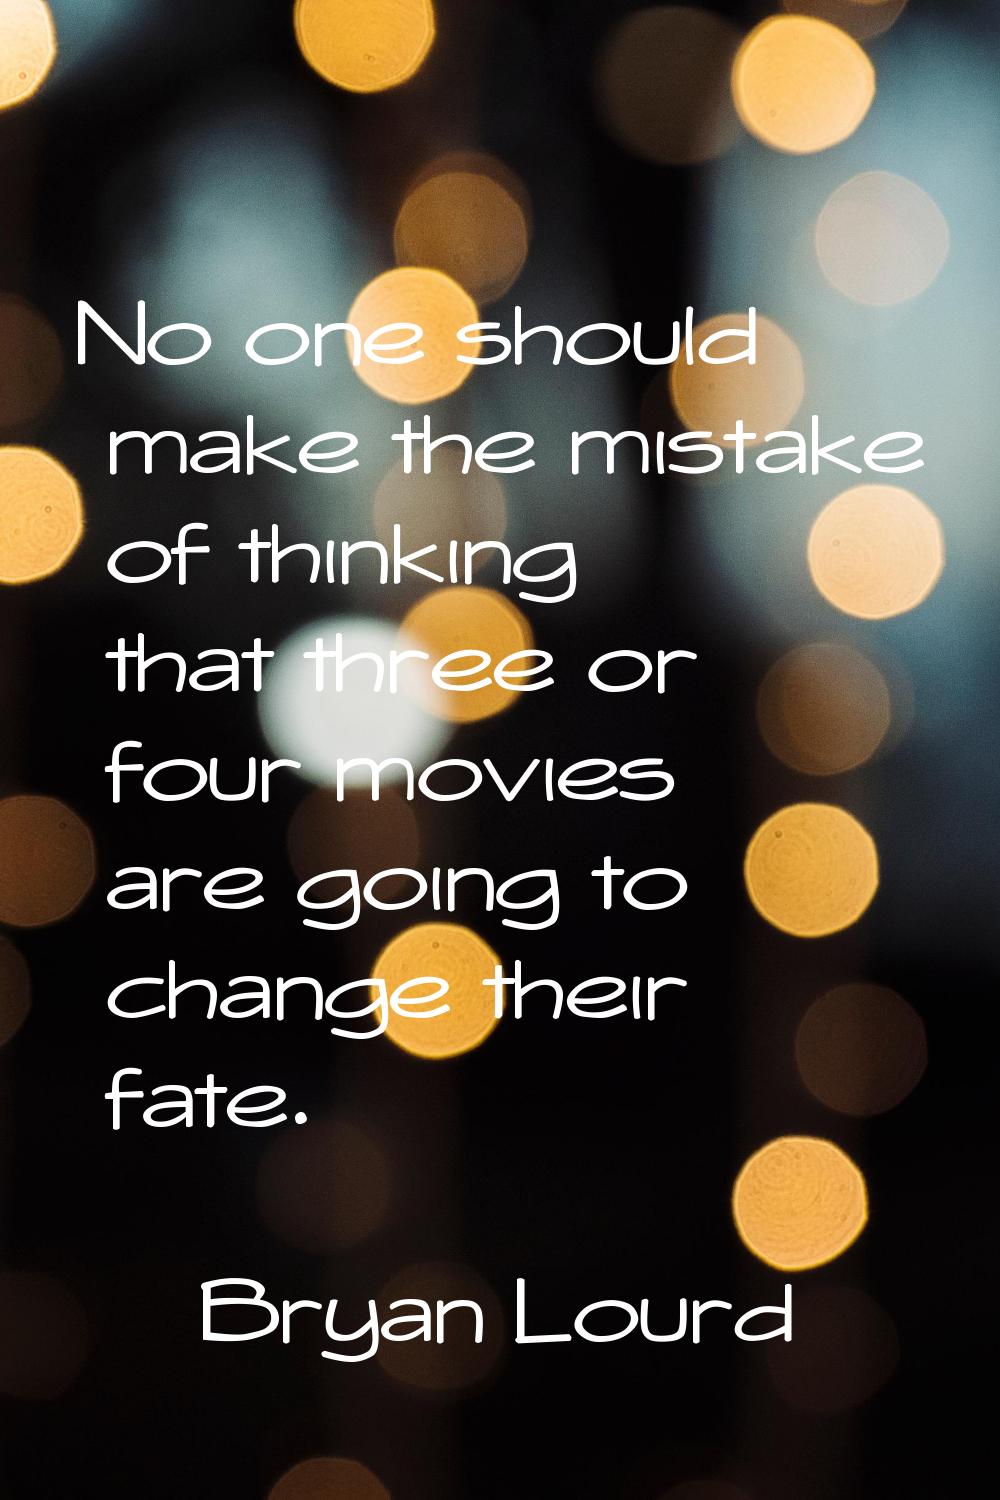 No one should make the mistake of thinking that three or four movies are going to change their fate